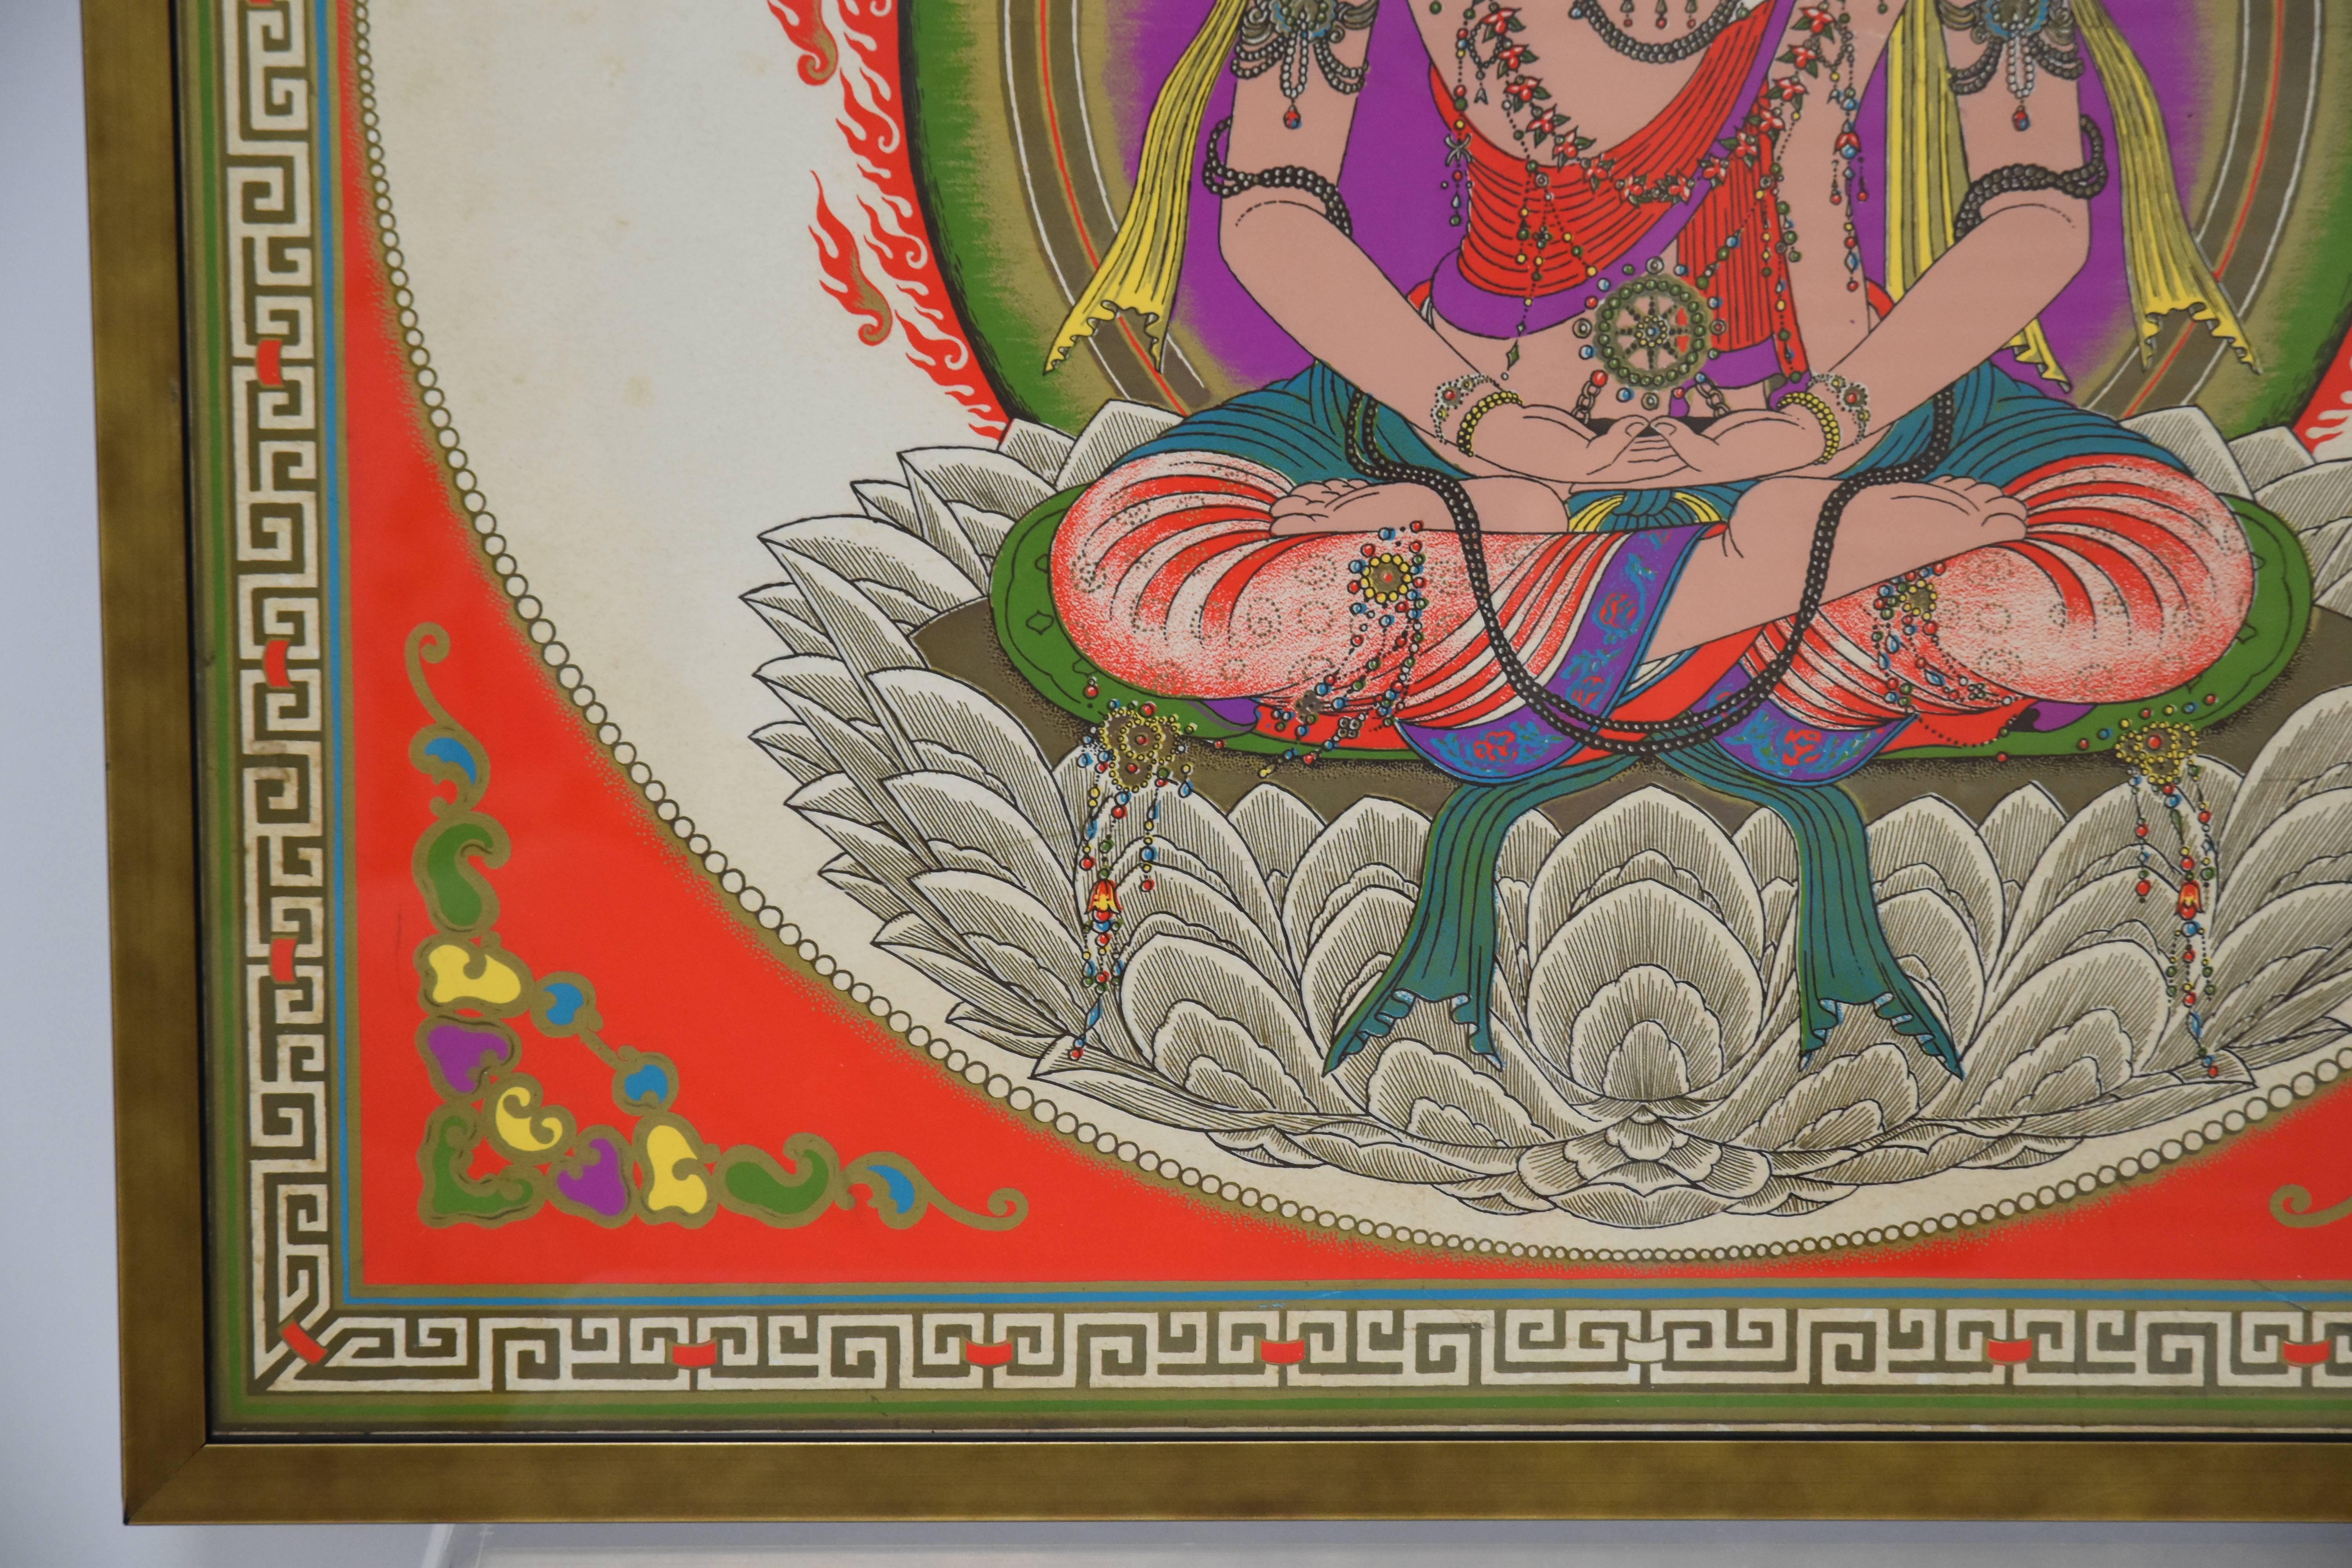 Vividly colored print of a seated Hindu diety with vibrant shades of orange, purple green and bordered with a gold Greek key detail.